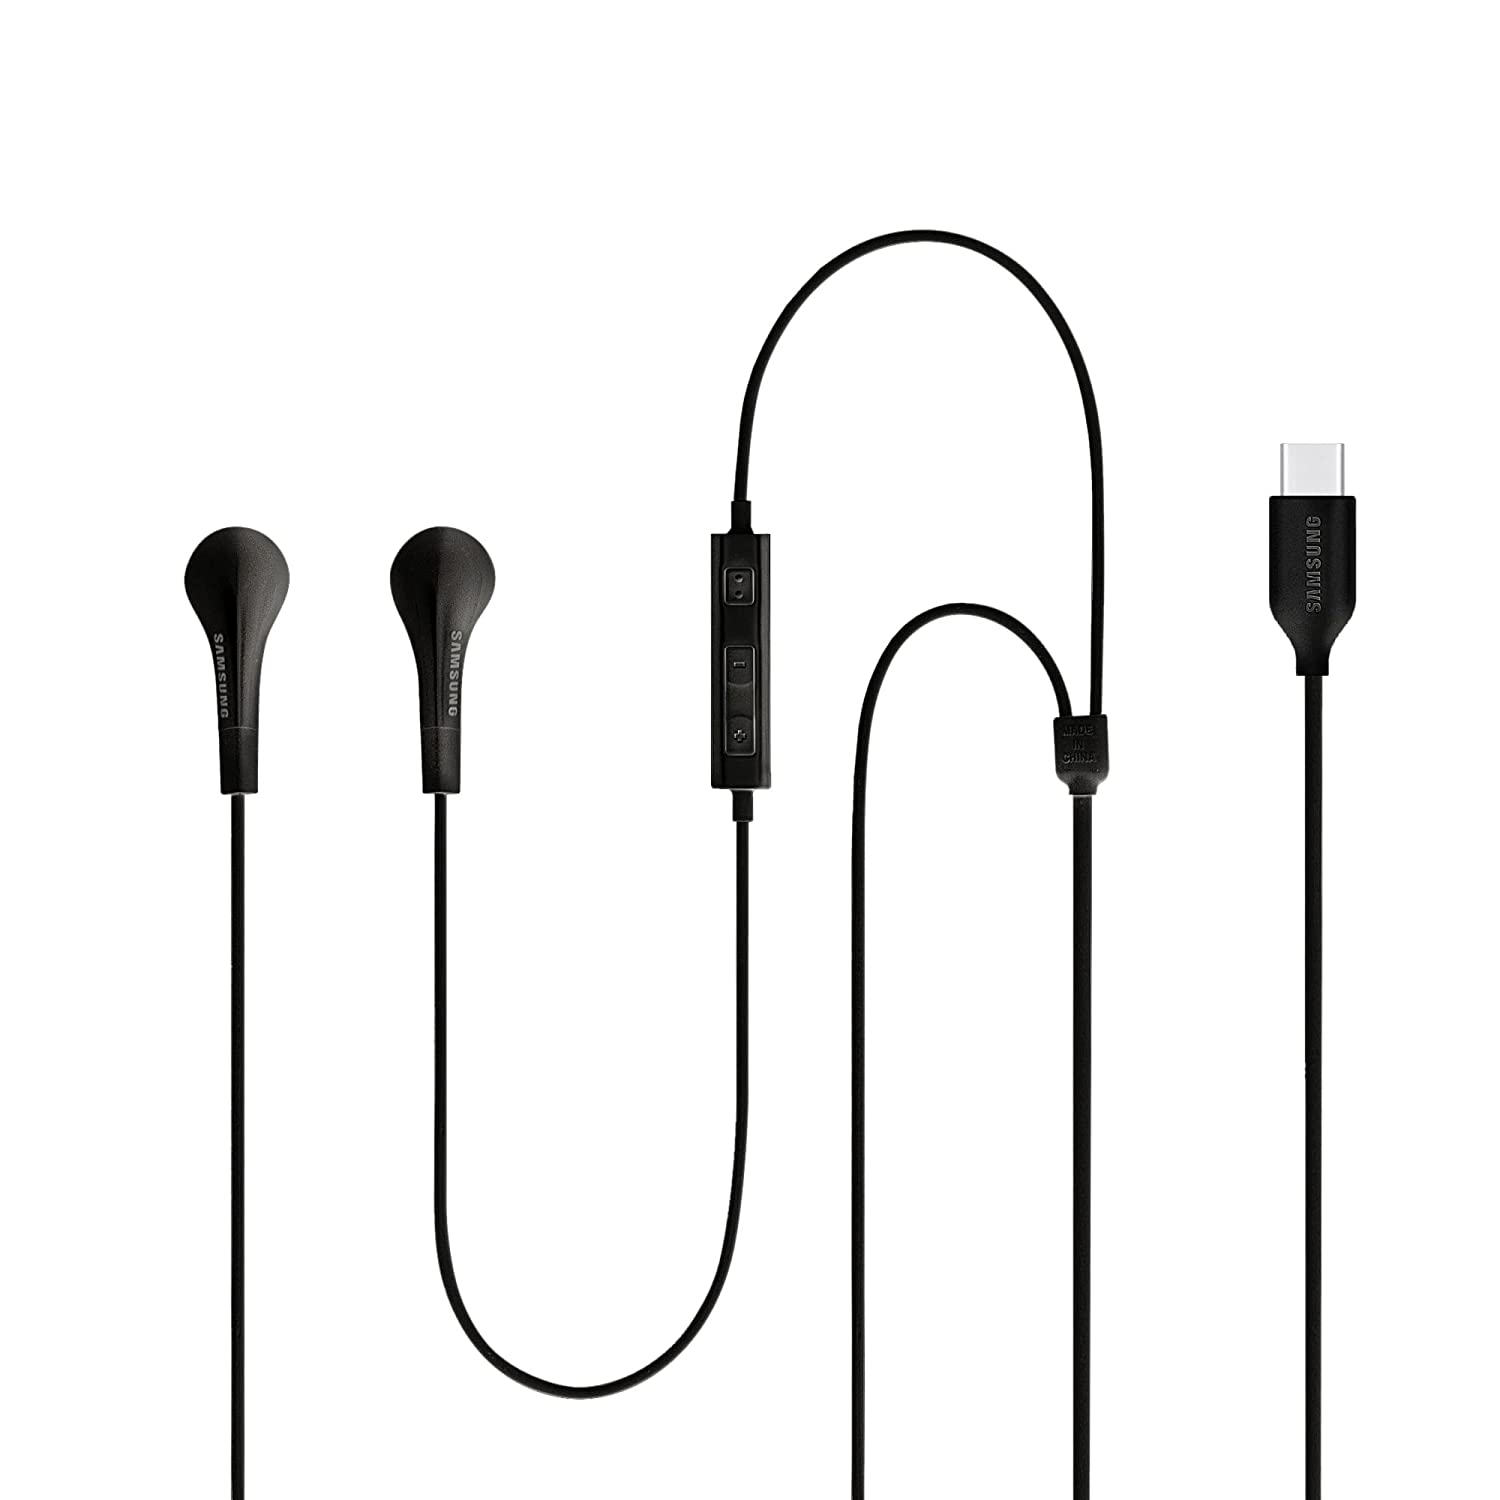 Samsung Original IC050 Type-C Wired in Ear Earphone with mic (Black)